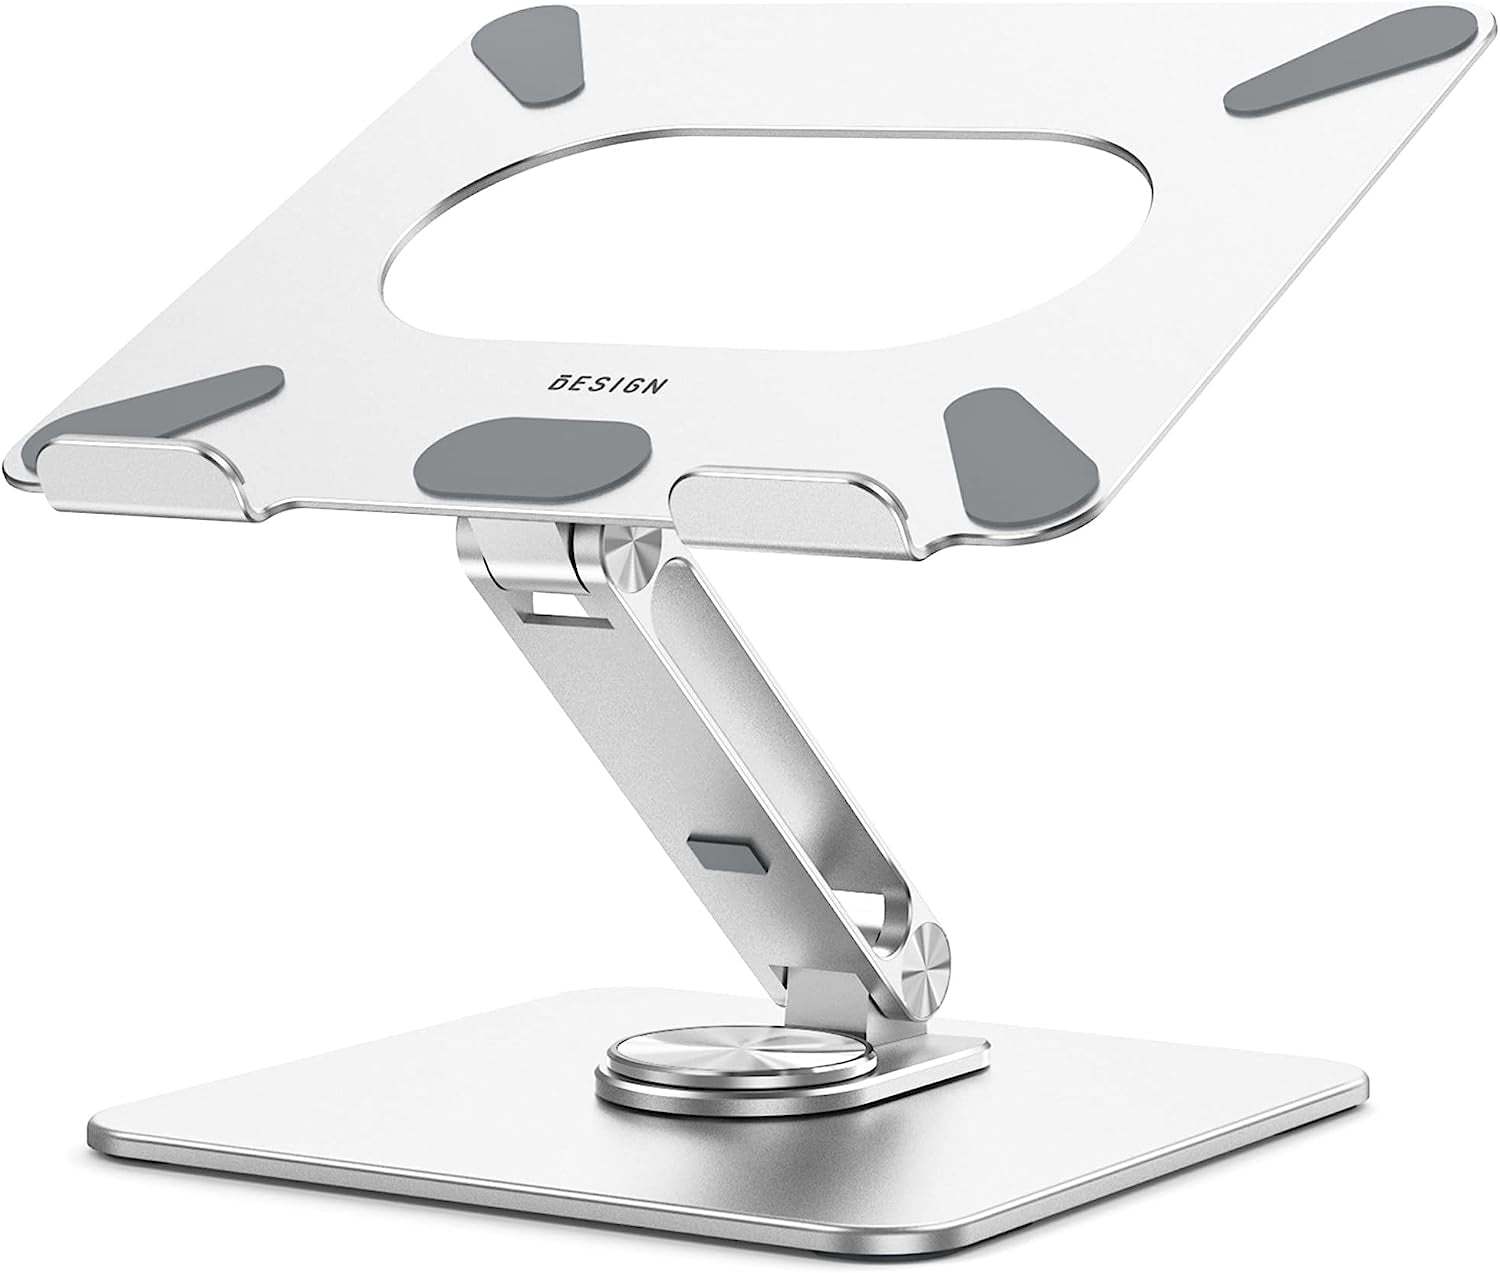 LSX7 Laptop Stand with 360° Rotating Base, Ergonomic Adjustable Notebook Stand, Riser Holder Computer Stand Compatible with Air, Pro, Dell, HP, Lenovo More 10-15.6" Laptops (Silver)